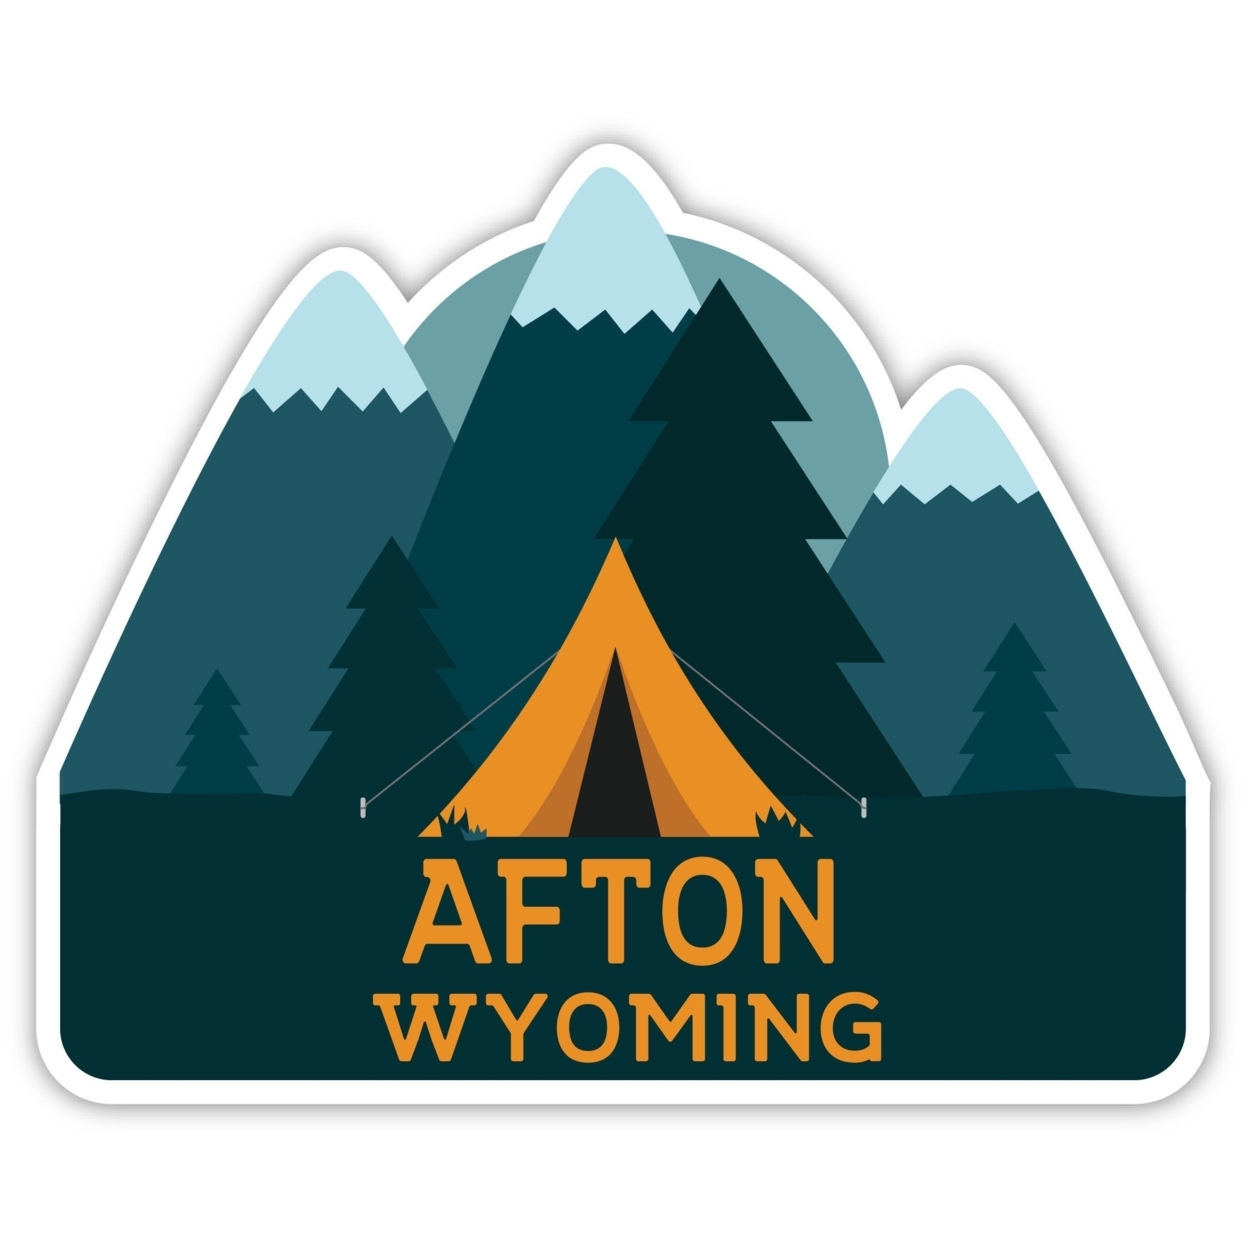 Afton Wyoming Souvenir Decorative Stickers (Choose Theme And Size) - 4-Pack, 2-Inch, Tent